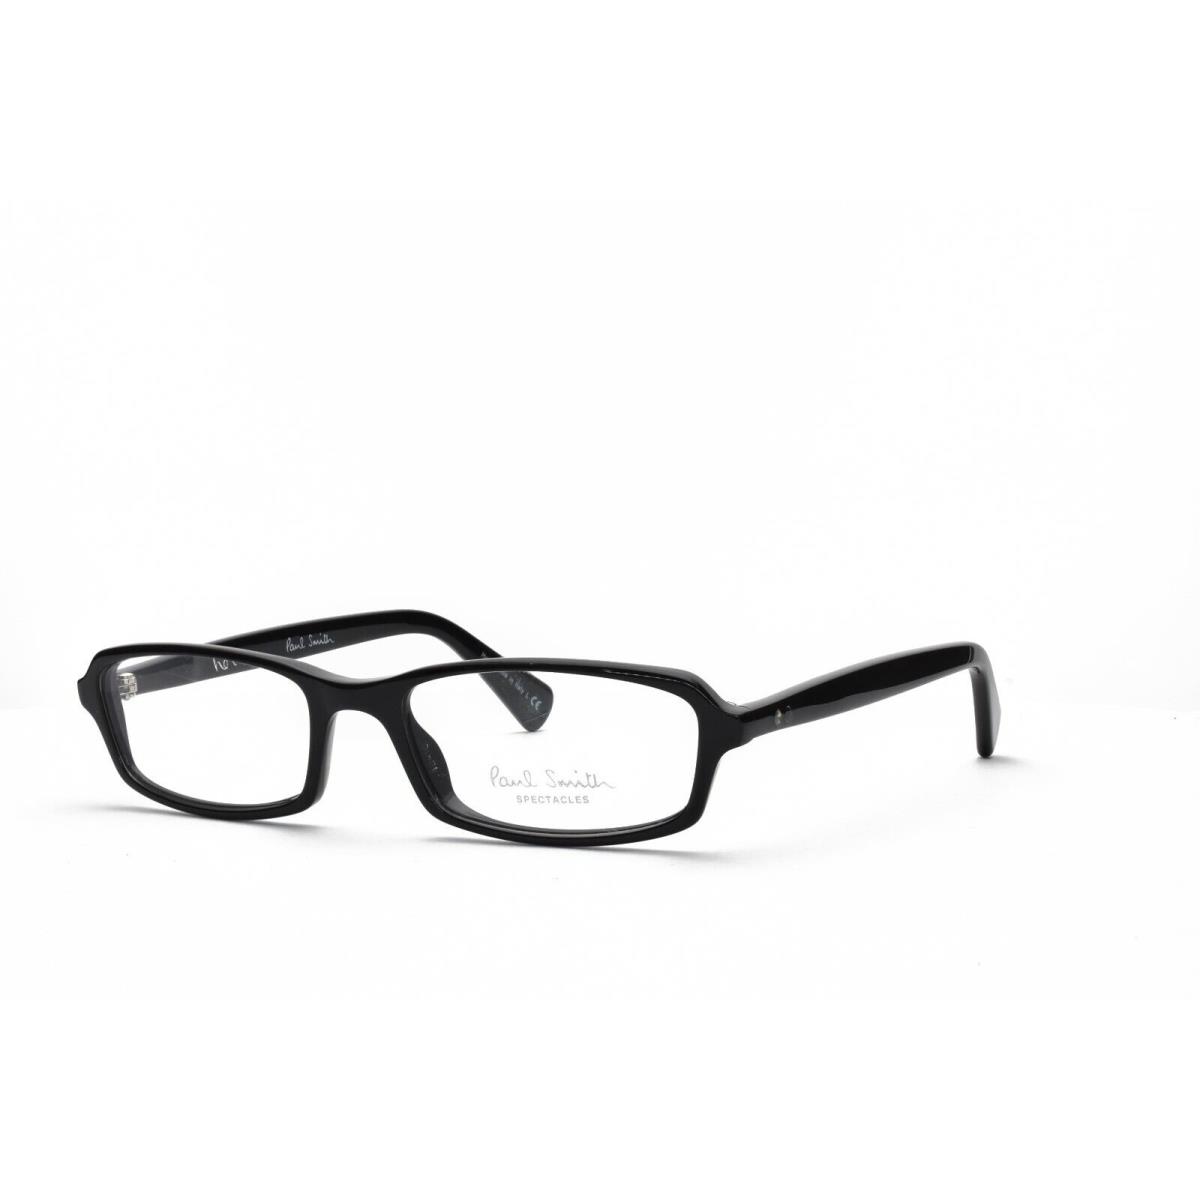 Paul Smith PS Doddie 8128 1005 Eyeglasses Frames Only 49-16-135